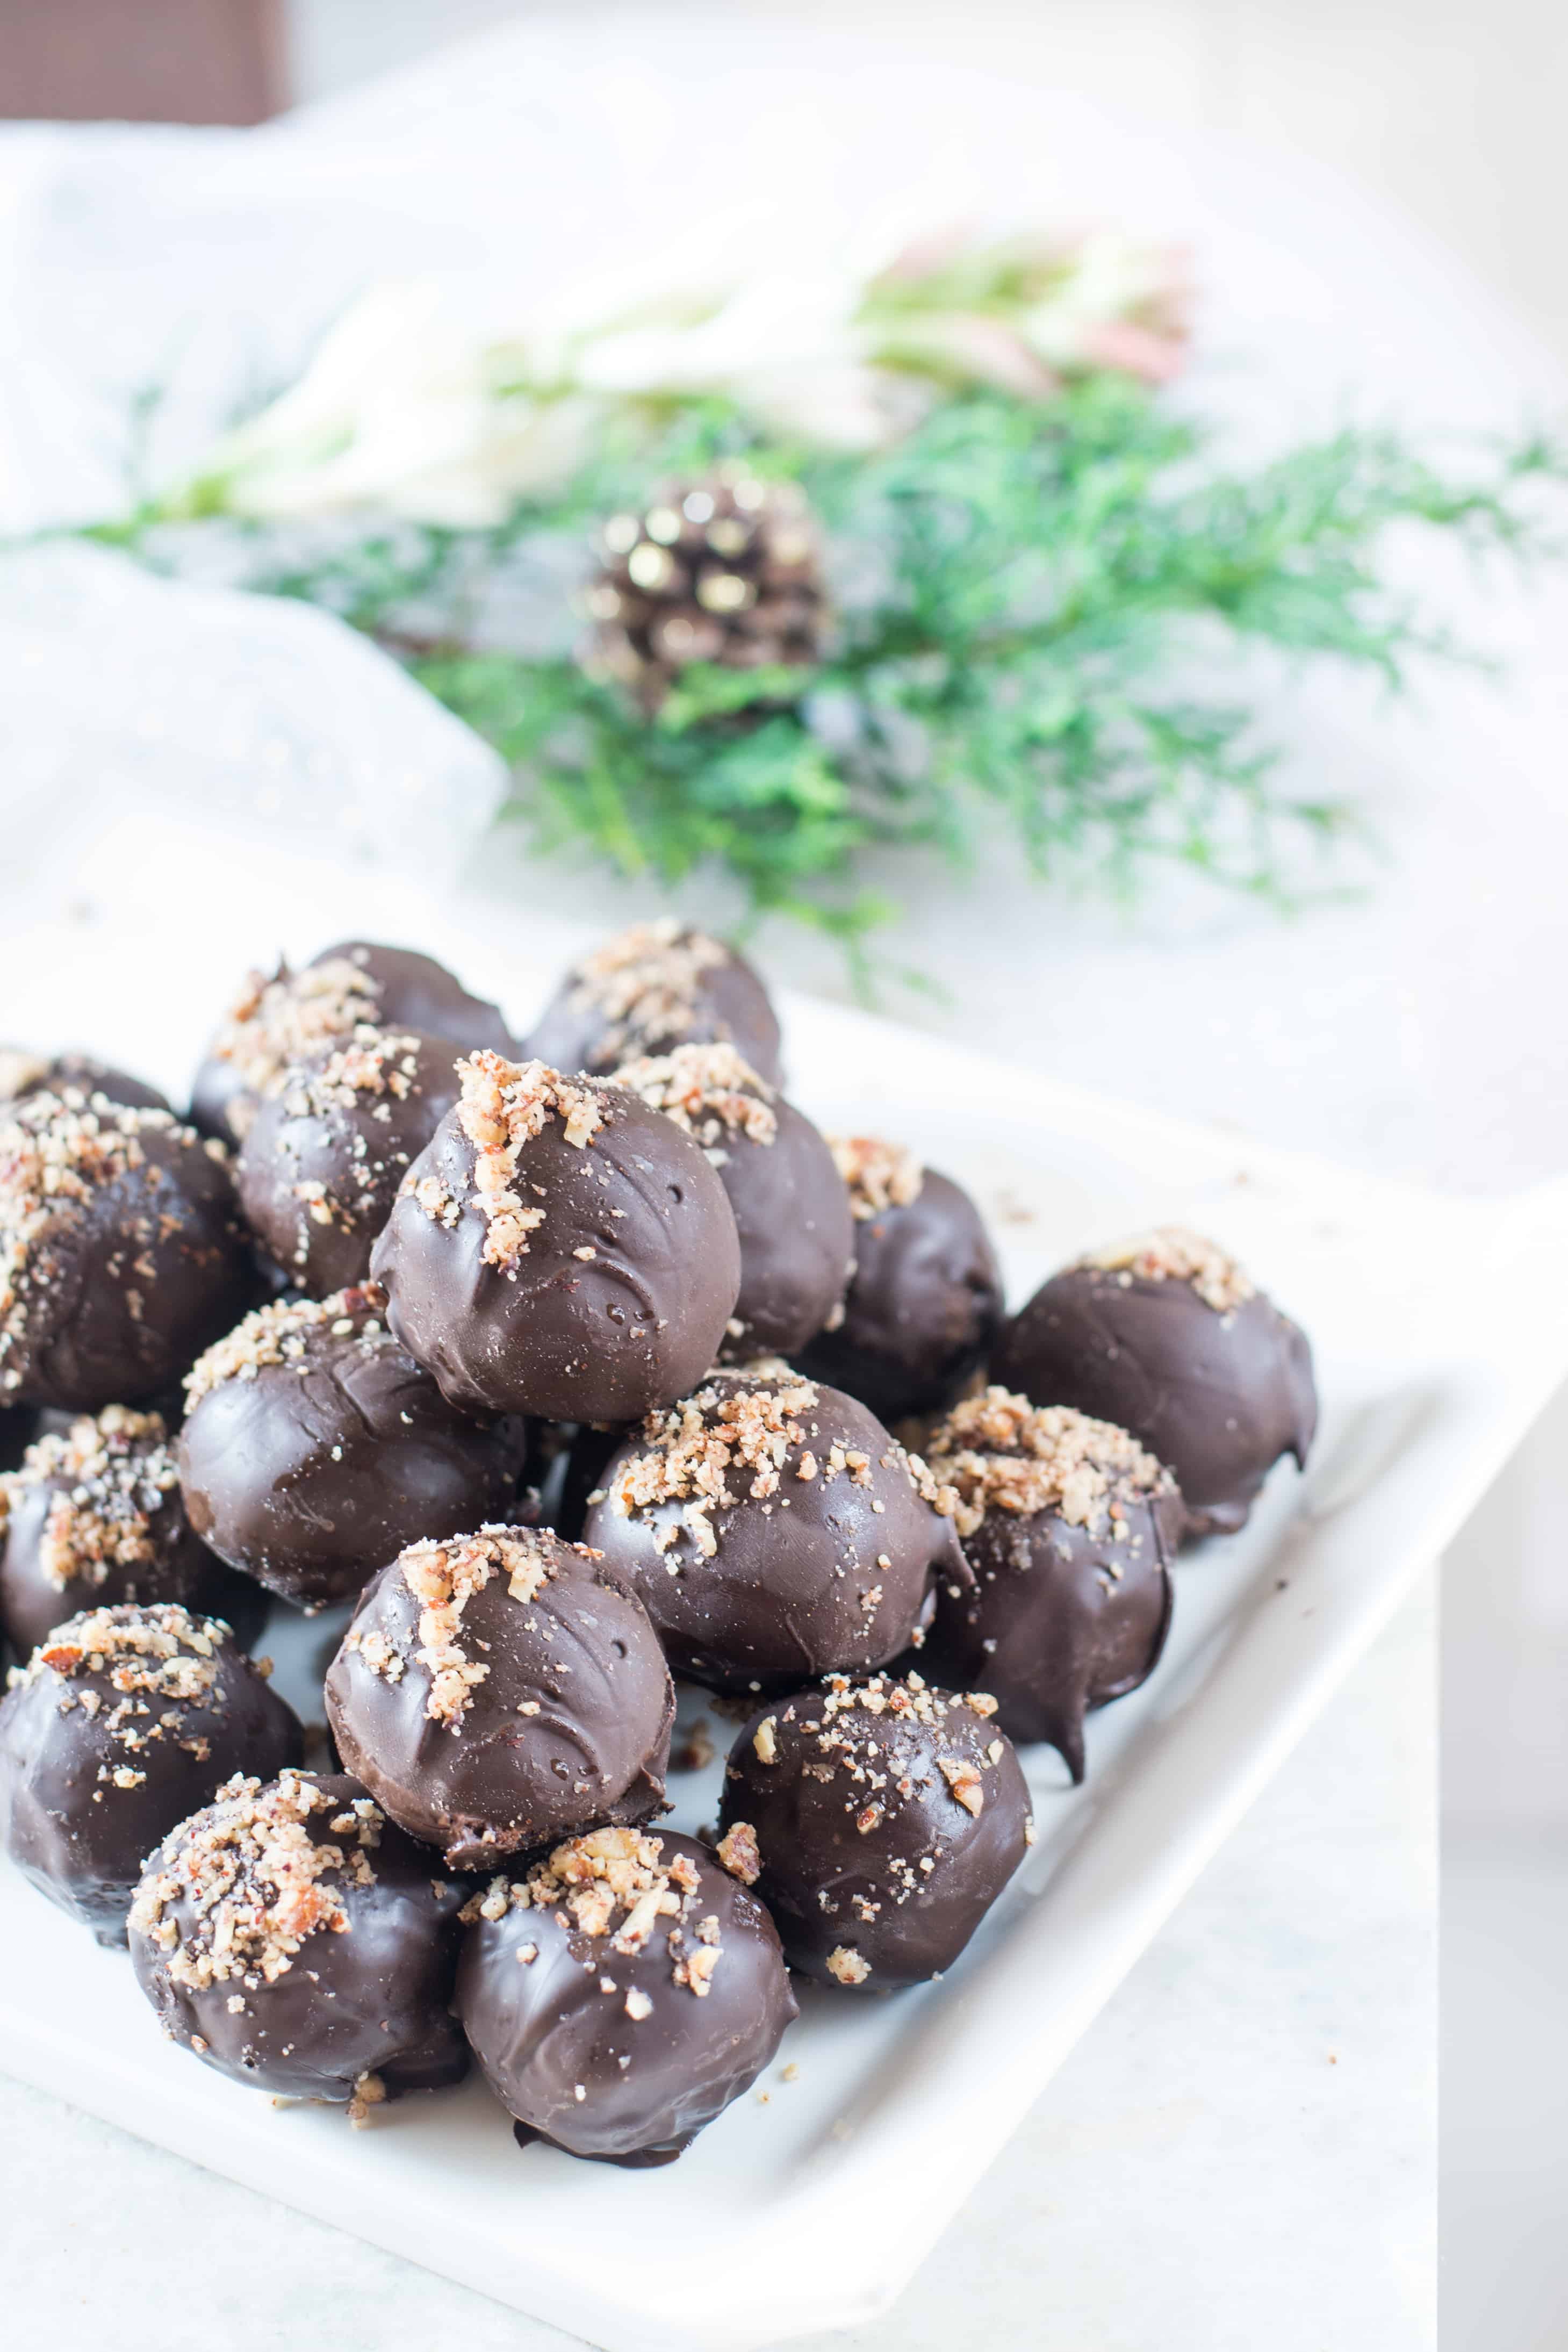 These Chocolate Gingerbread Truffles are made of gingerbread cookies. These truffles are perfect as Christmas gift or on your holiday cookies basket.